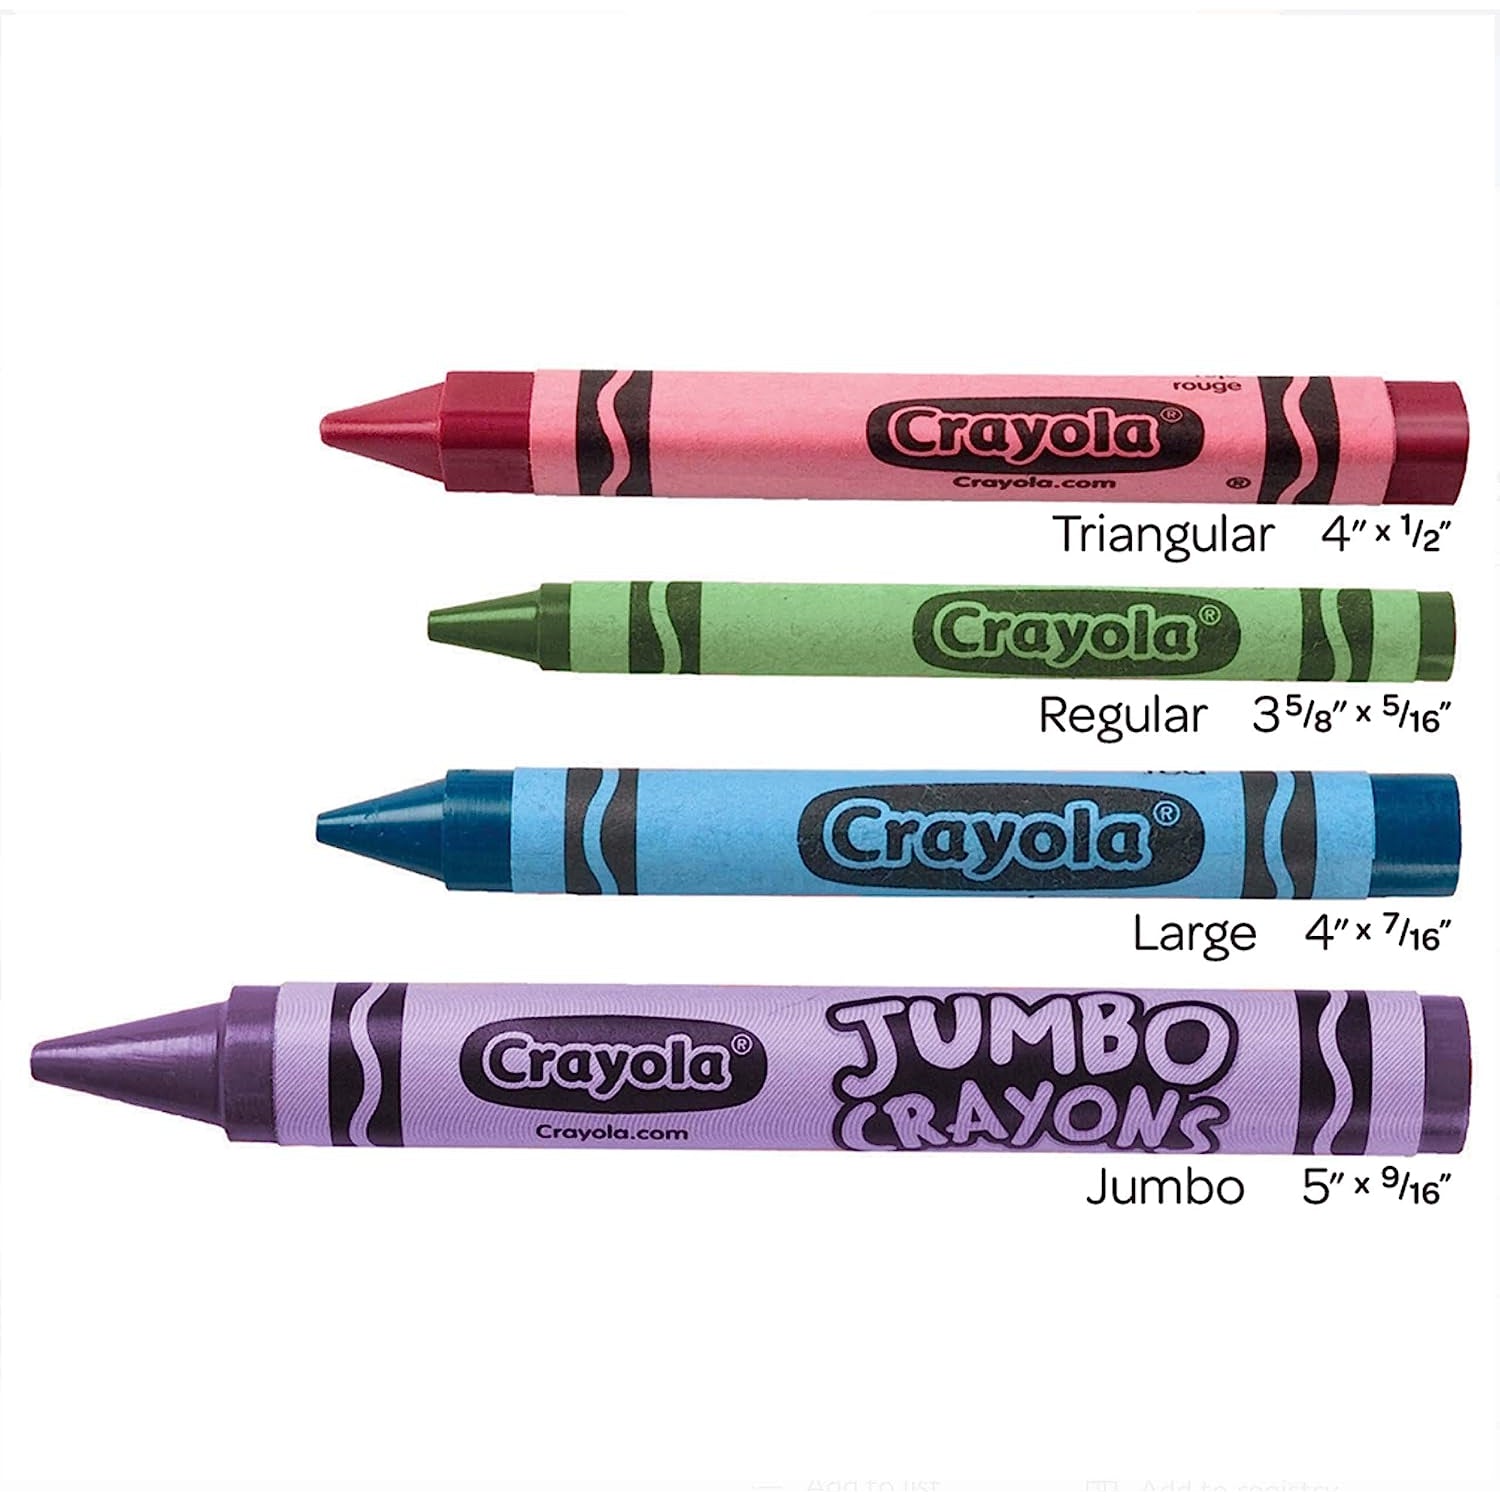 4 Pack of Crayons with 2 Crayon Box, Crayons 24 Count, Assorted